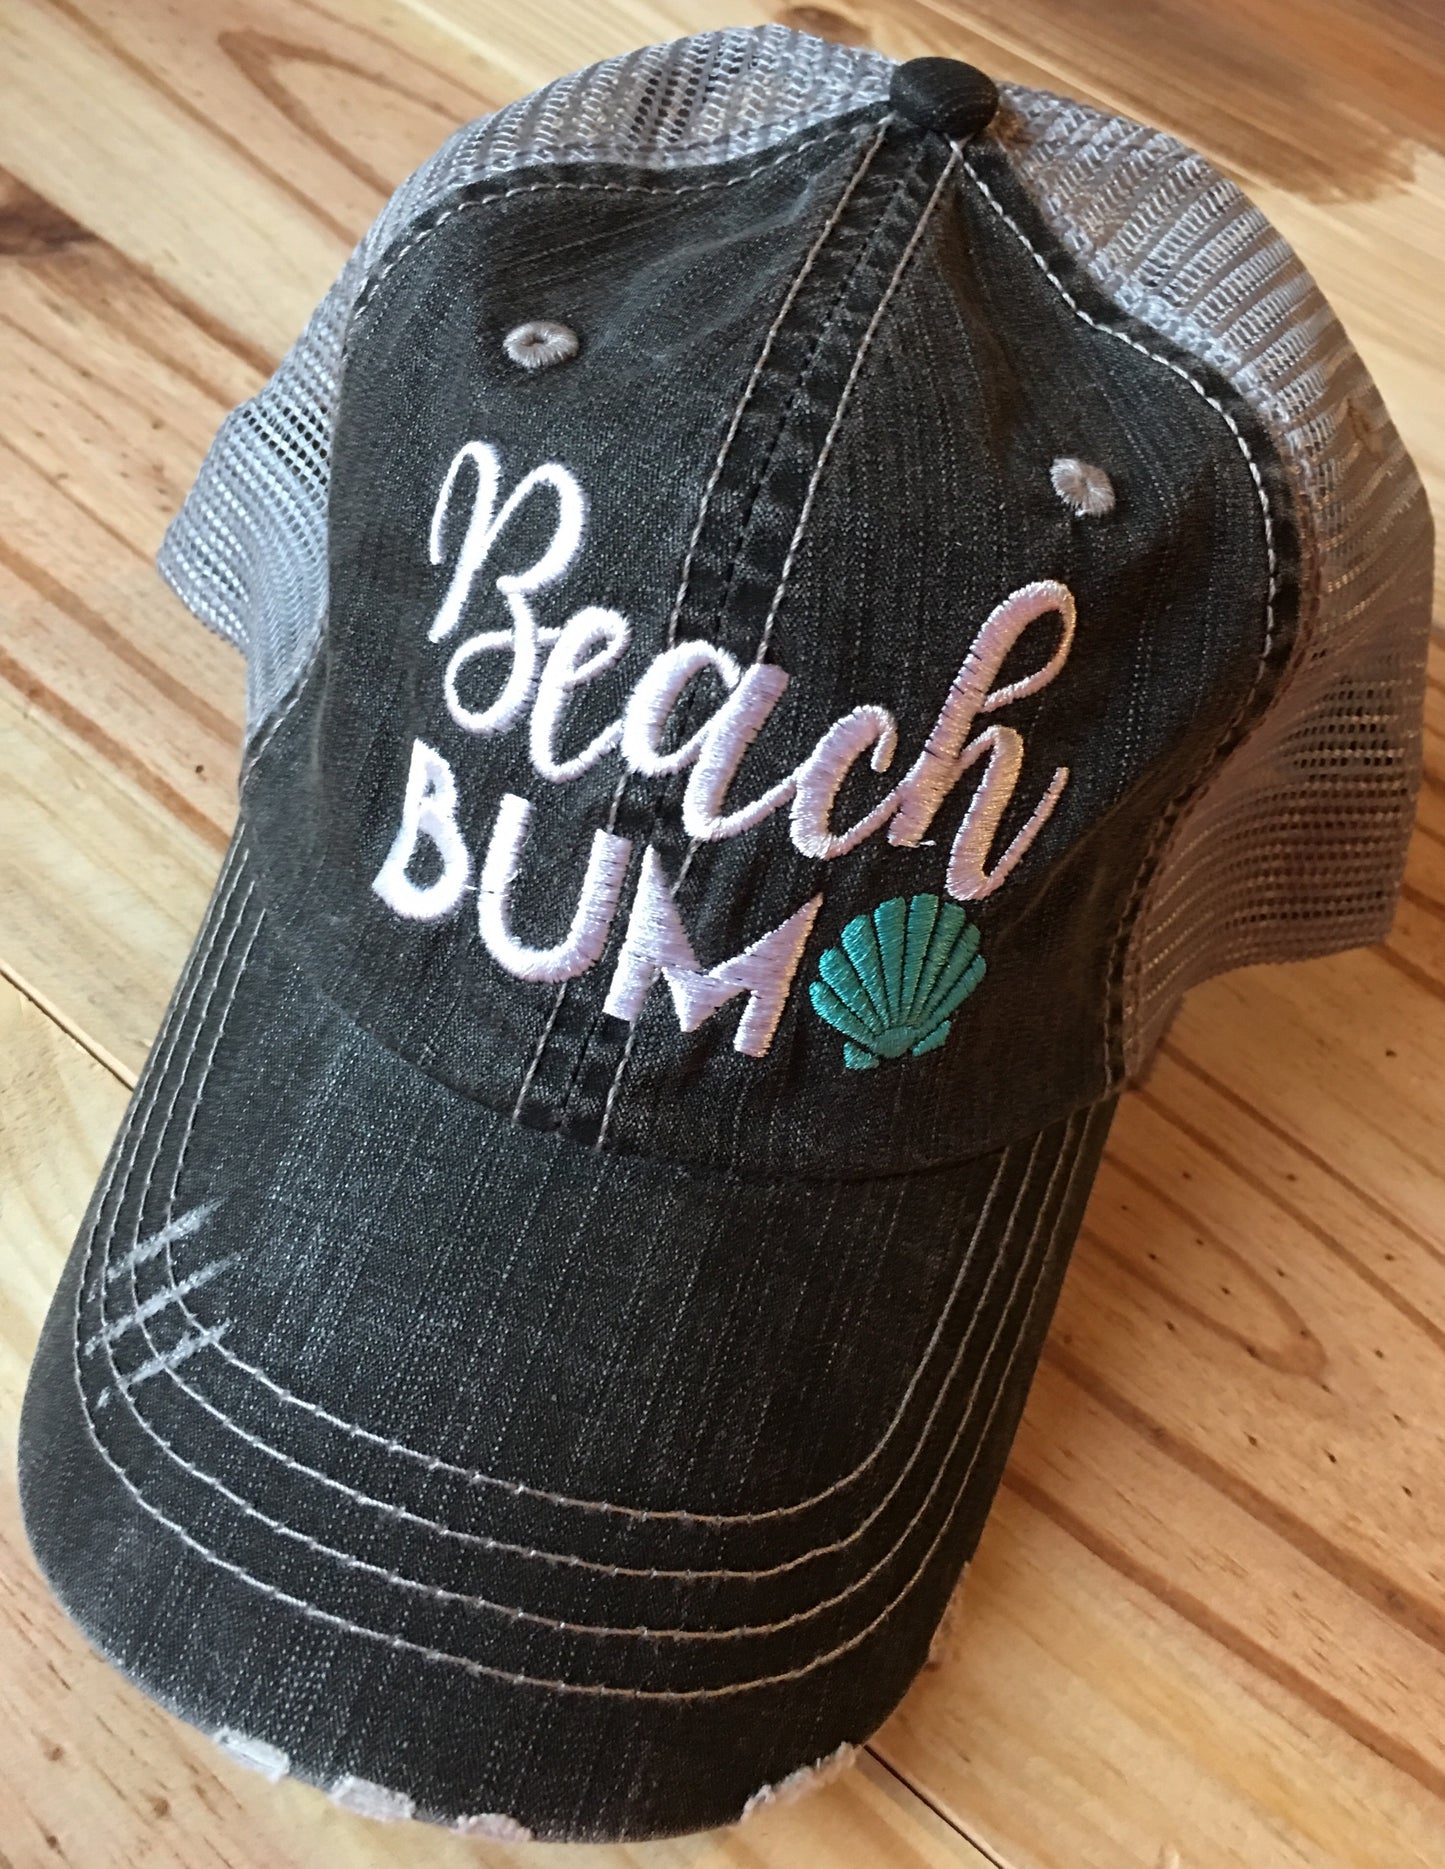 Hat { Beach Bum } 3 styles / colors. Seashells. Embroidered distressed trucker caps with adjustable velcro and hole for pony. - Stacy's Pink Martini Boutique